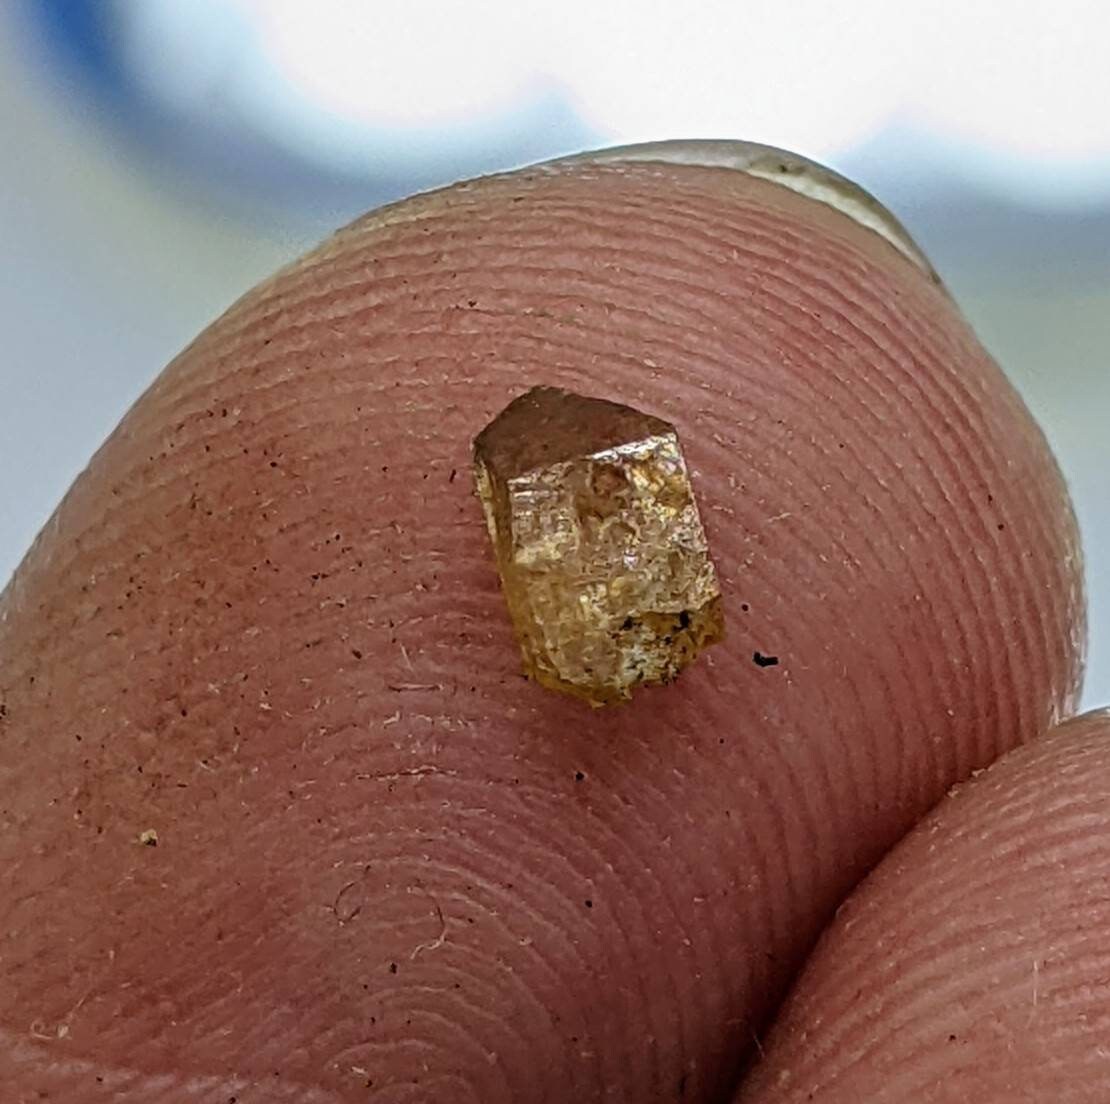 ARSAA GEMS AND MINERALSVery rare rough small thumbnail sized lot of xenotime crystals from Zagi Mountain KP Pakistan, 3 grams - Premium  from ARSAA GEMS AND MINERALS - Just $70.00! Shop now at ARSAA GEMS AND MINERALS